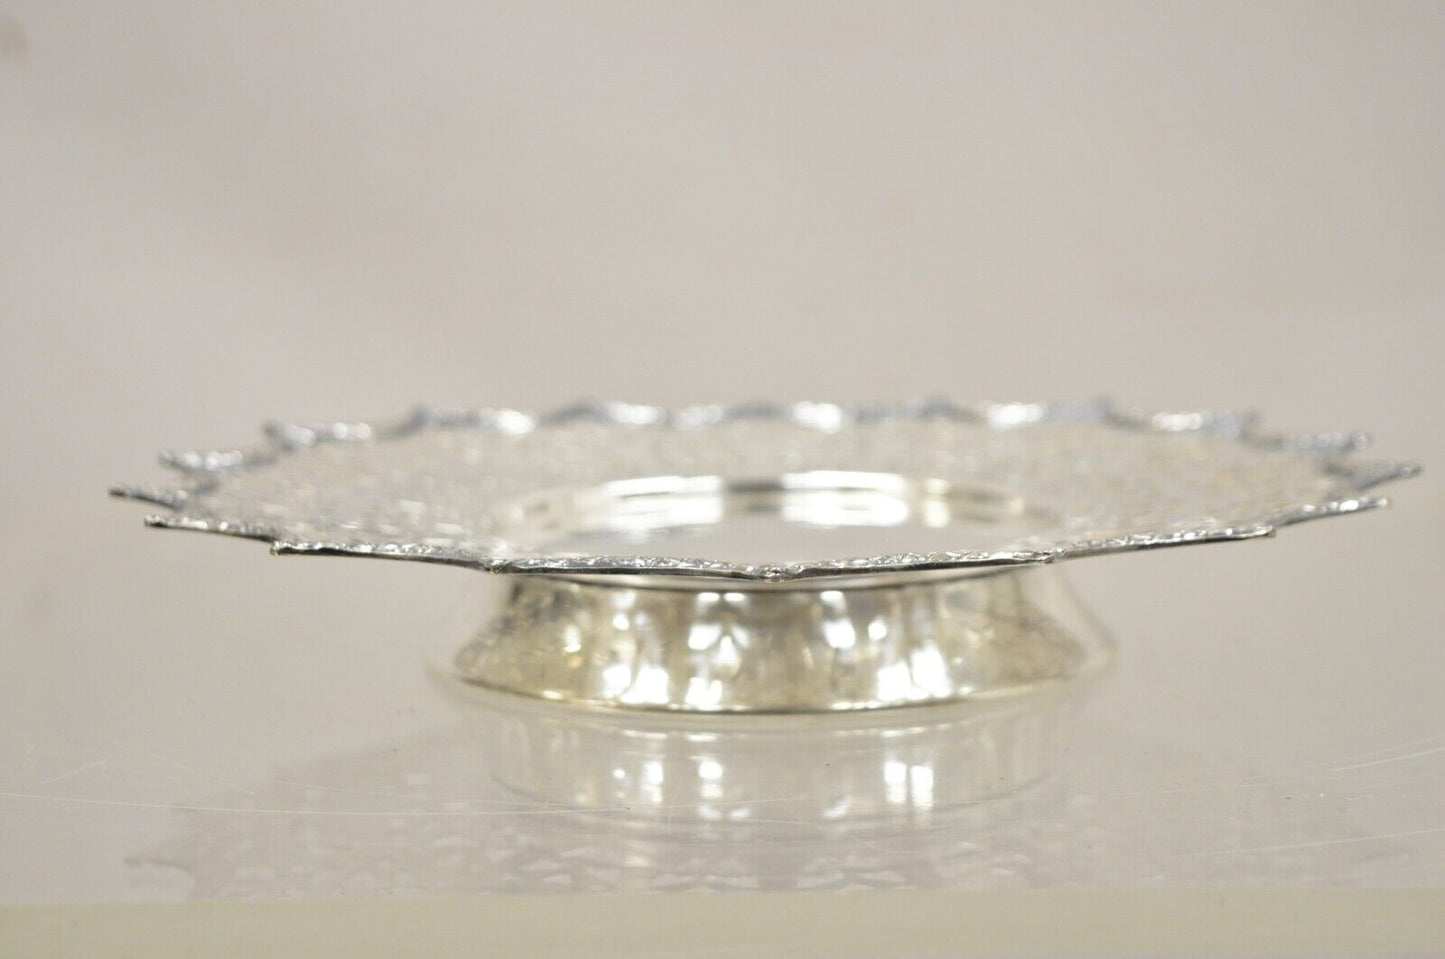 Victorian Silver Plated Draped Rim Small Footed Trinket Dish Platter Tray